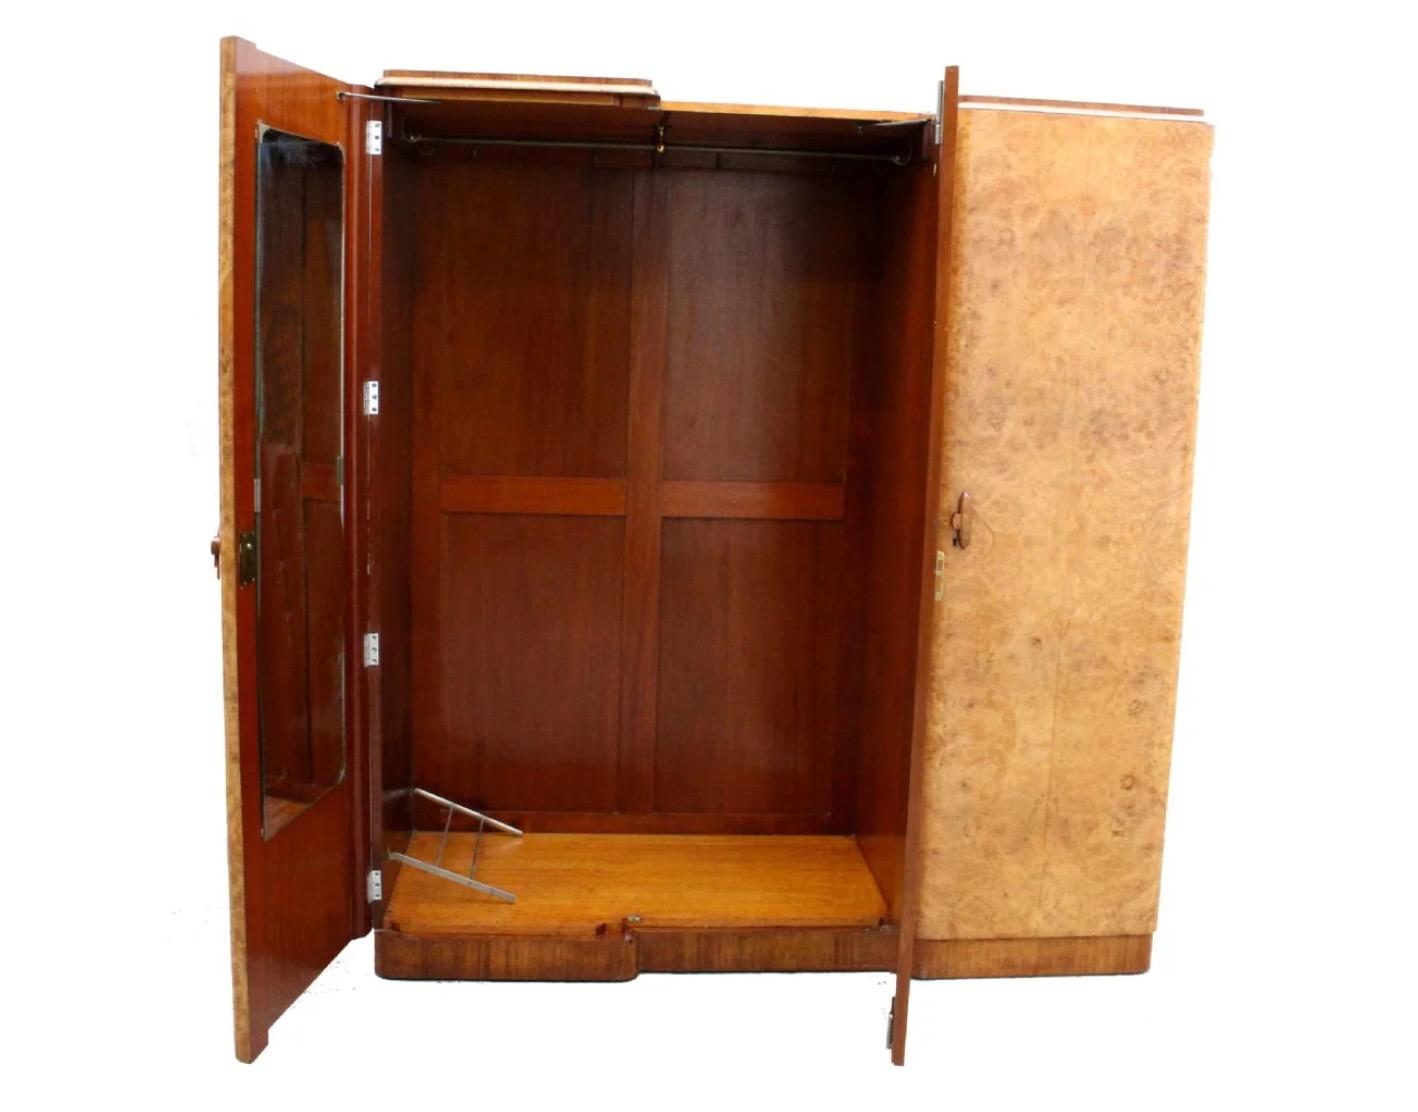 For your consideration is this very impressive looking Art Deco three door triple wardrobe of smaller dimensions and is absolutely stunning, inside and out!. Dating to the 1930's the quality throughout this piece is of the highest spec with no